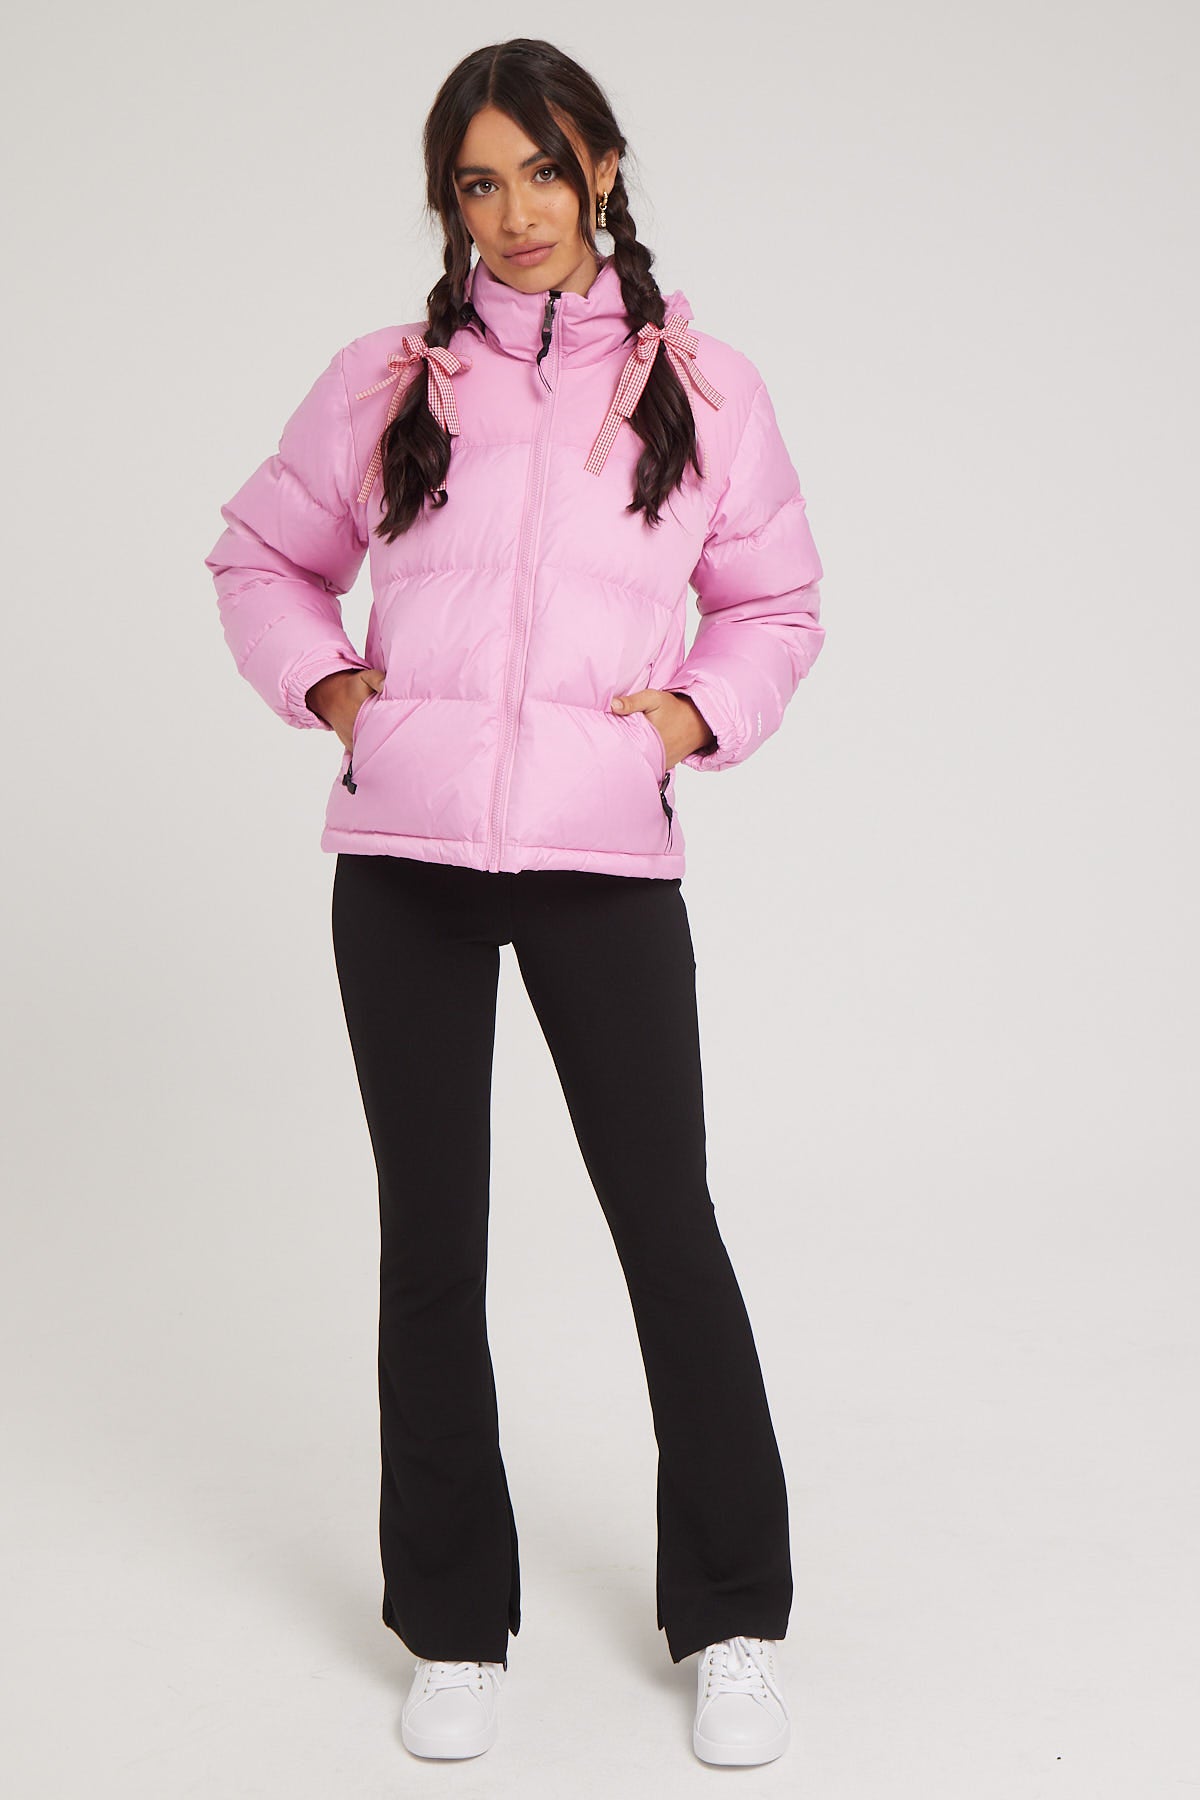 The North Face Women's 1996 Retro Nuptse Jacket Orchid Pink